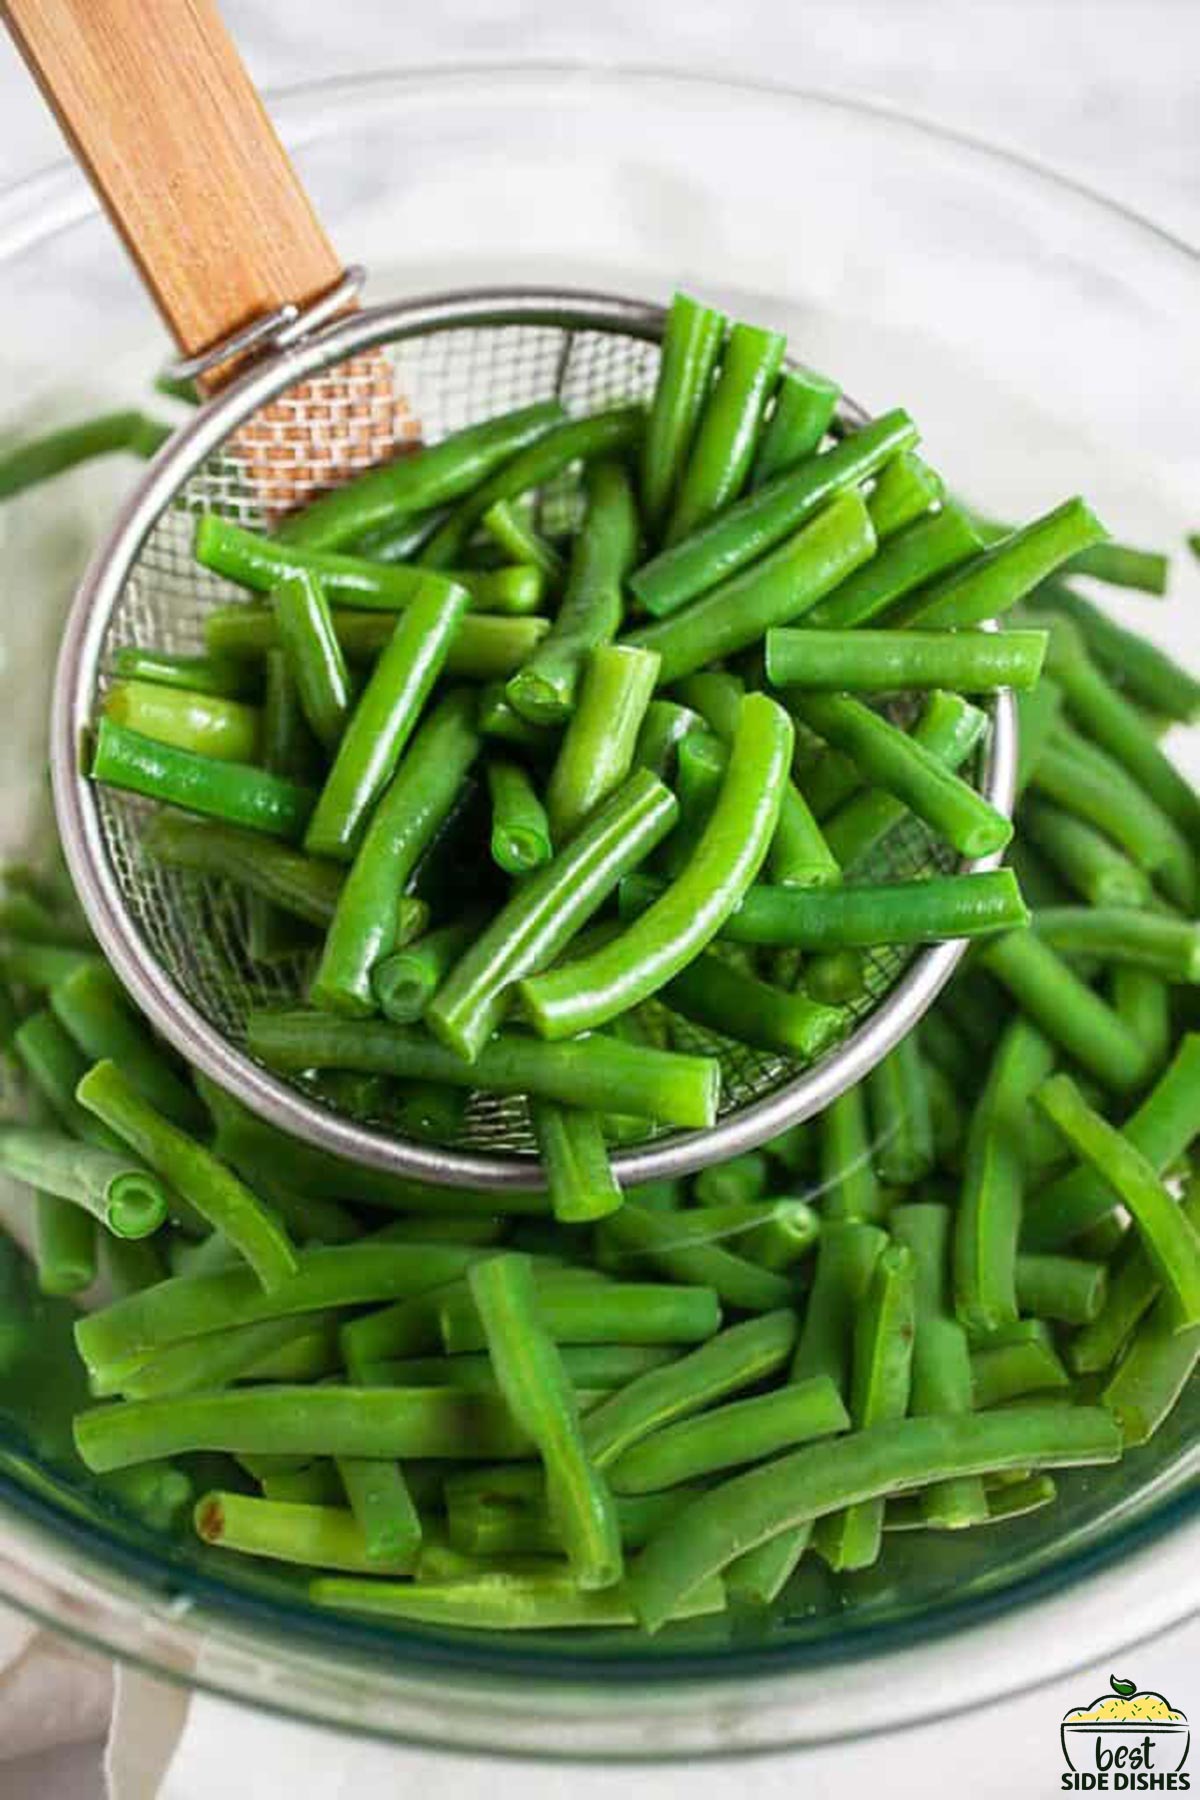 After blanching fresh green beans